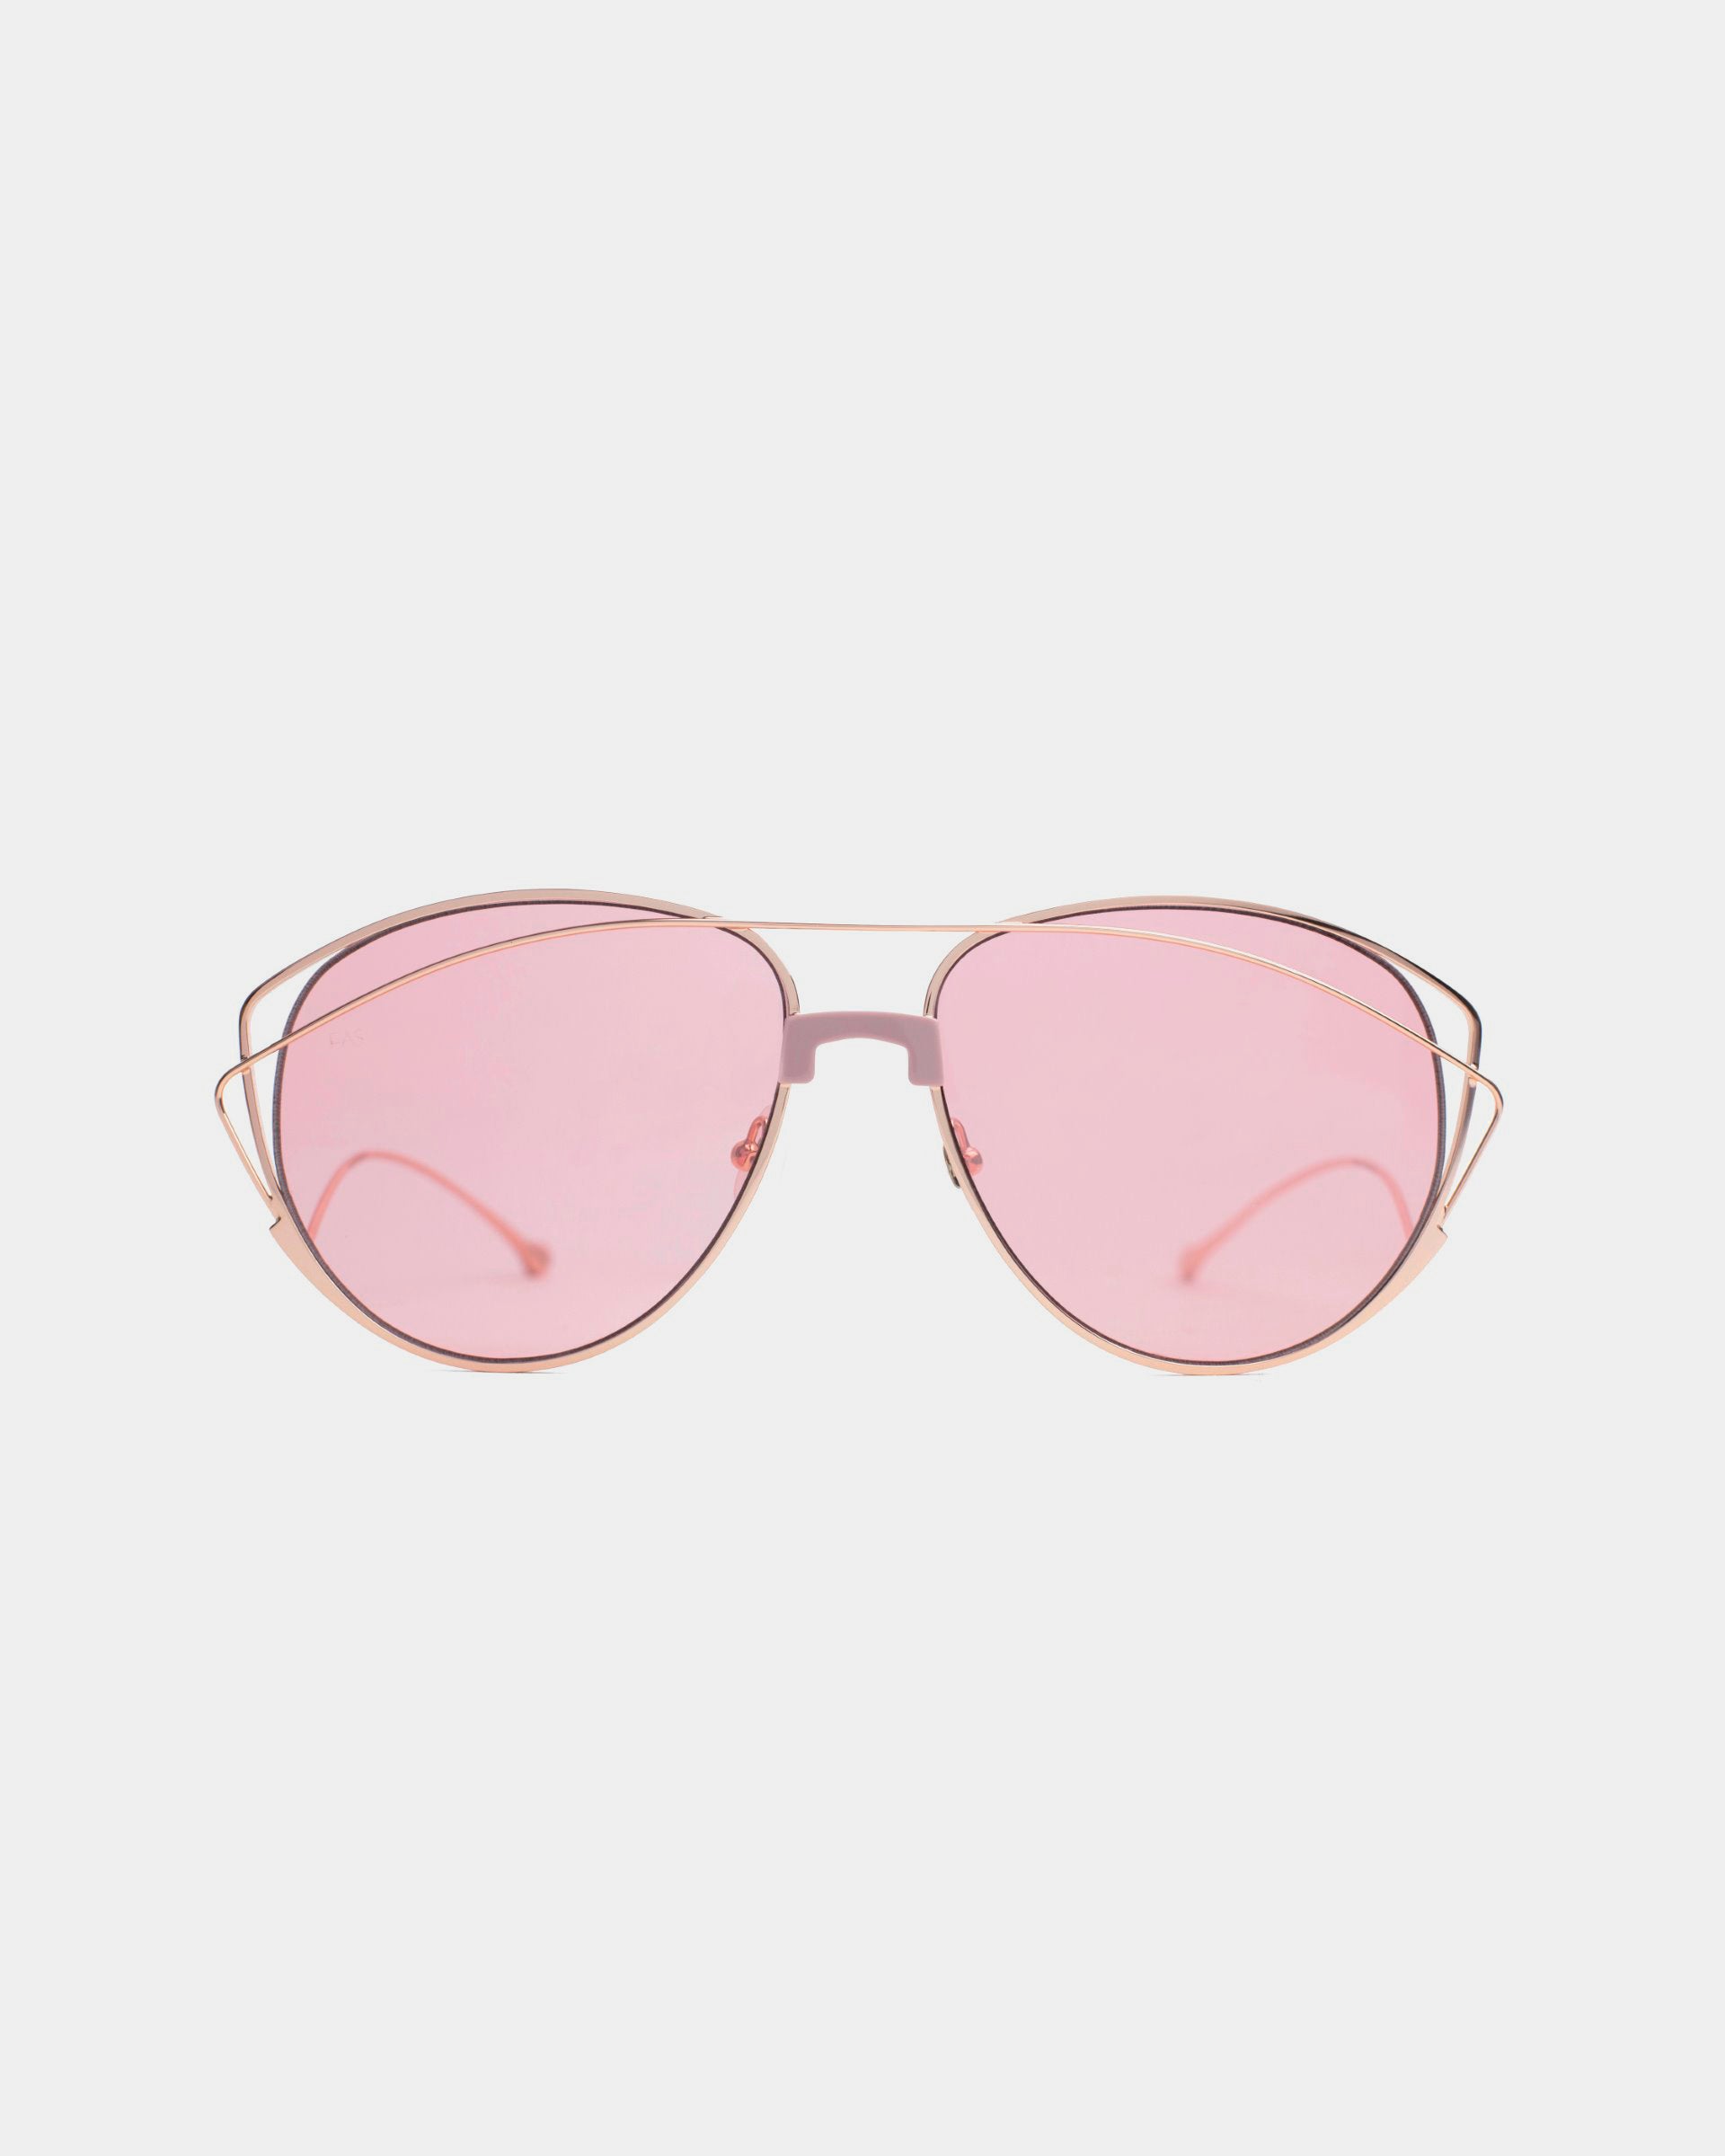 A pair of stylish For Art's Sake® Dark Eyes sunglasses with pink-tinted nylon lenses and gold stainless steel frames. The design features a double bridge and thin, curved temples, offering 100% UV protection. The background is white.